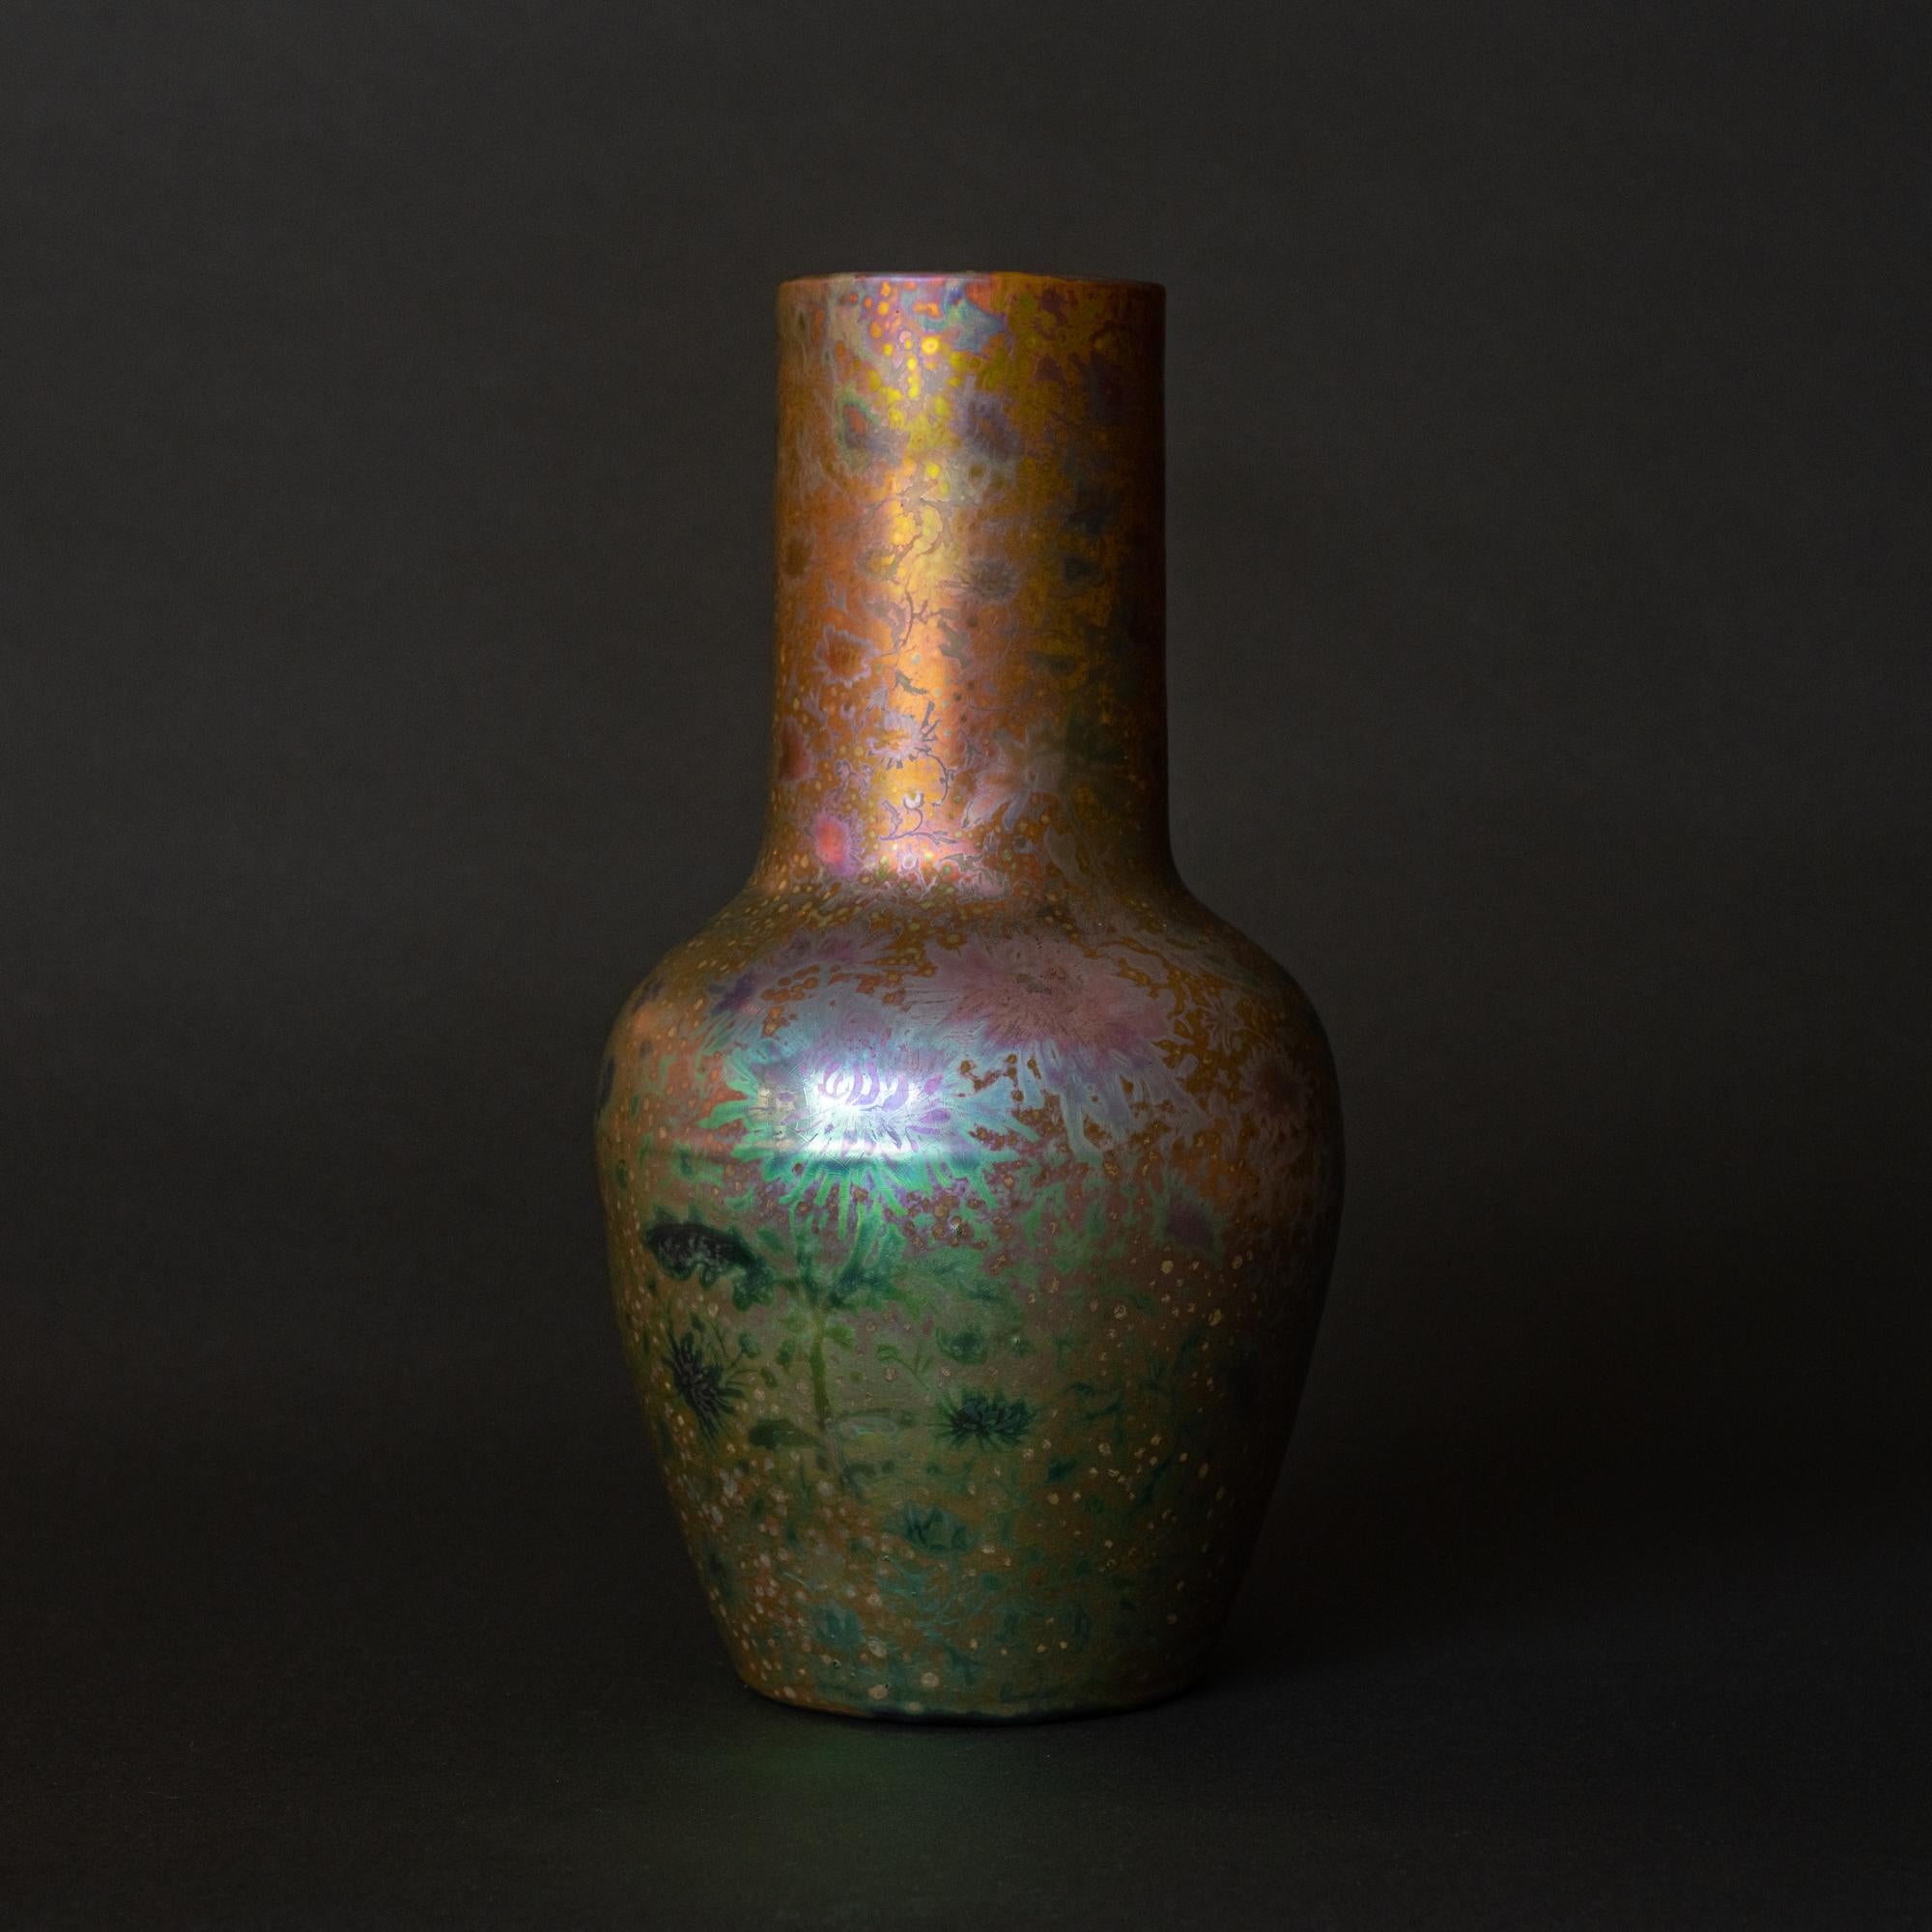 An encounter with Massier’s luster-glazed ceramics is an embarkation on an acid-colored trip, the sort of exploration which inspires deep reflection and requires transparency. Clement Massier, an accomplished ceramist born into a multi-generational